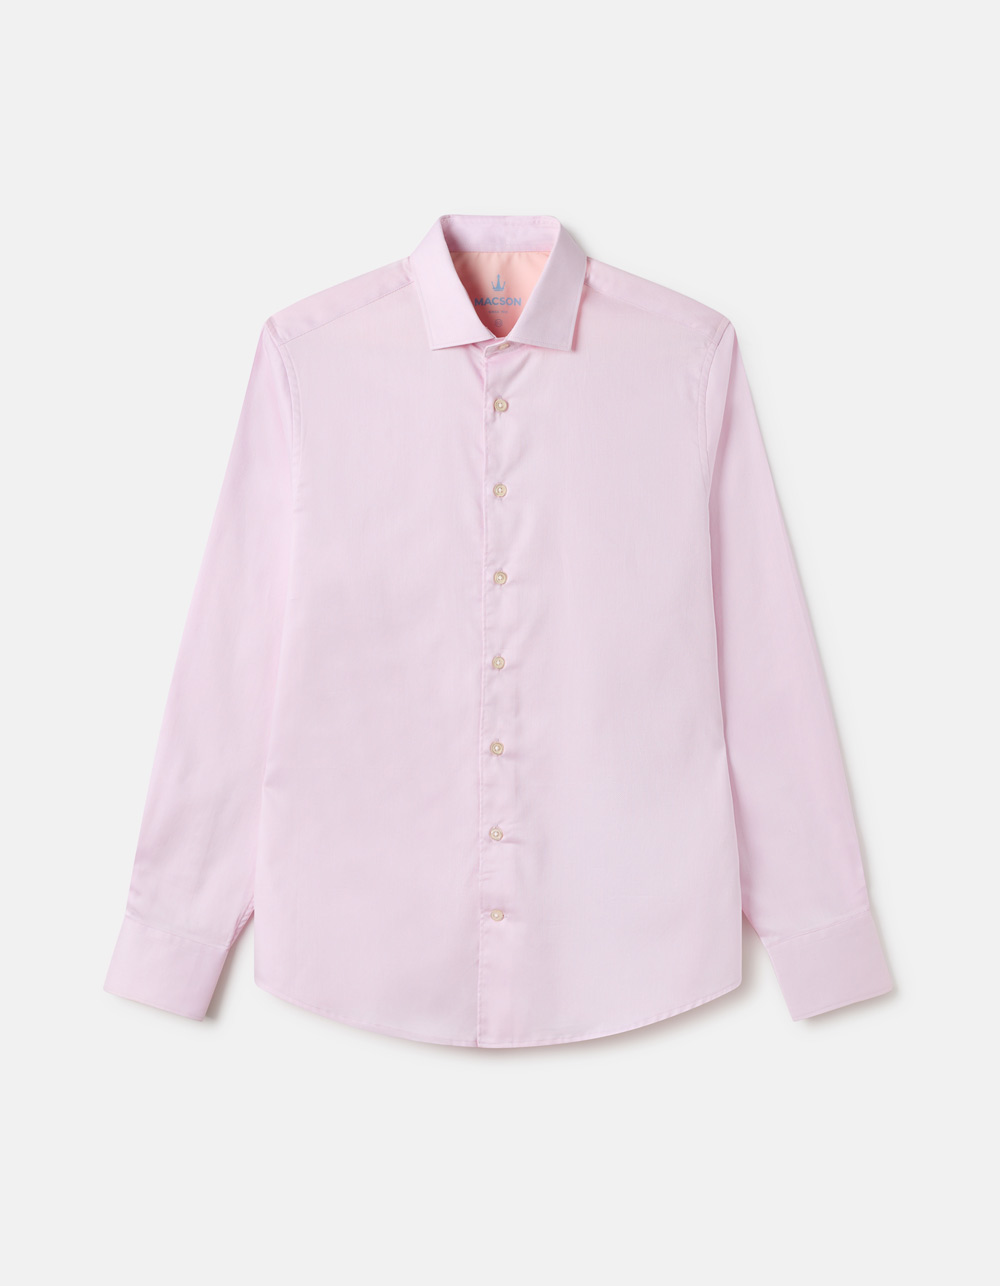 Camisa con microestructura rombo rosa